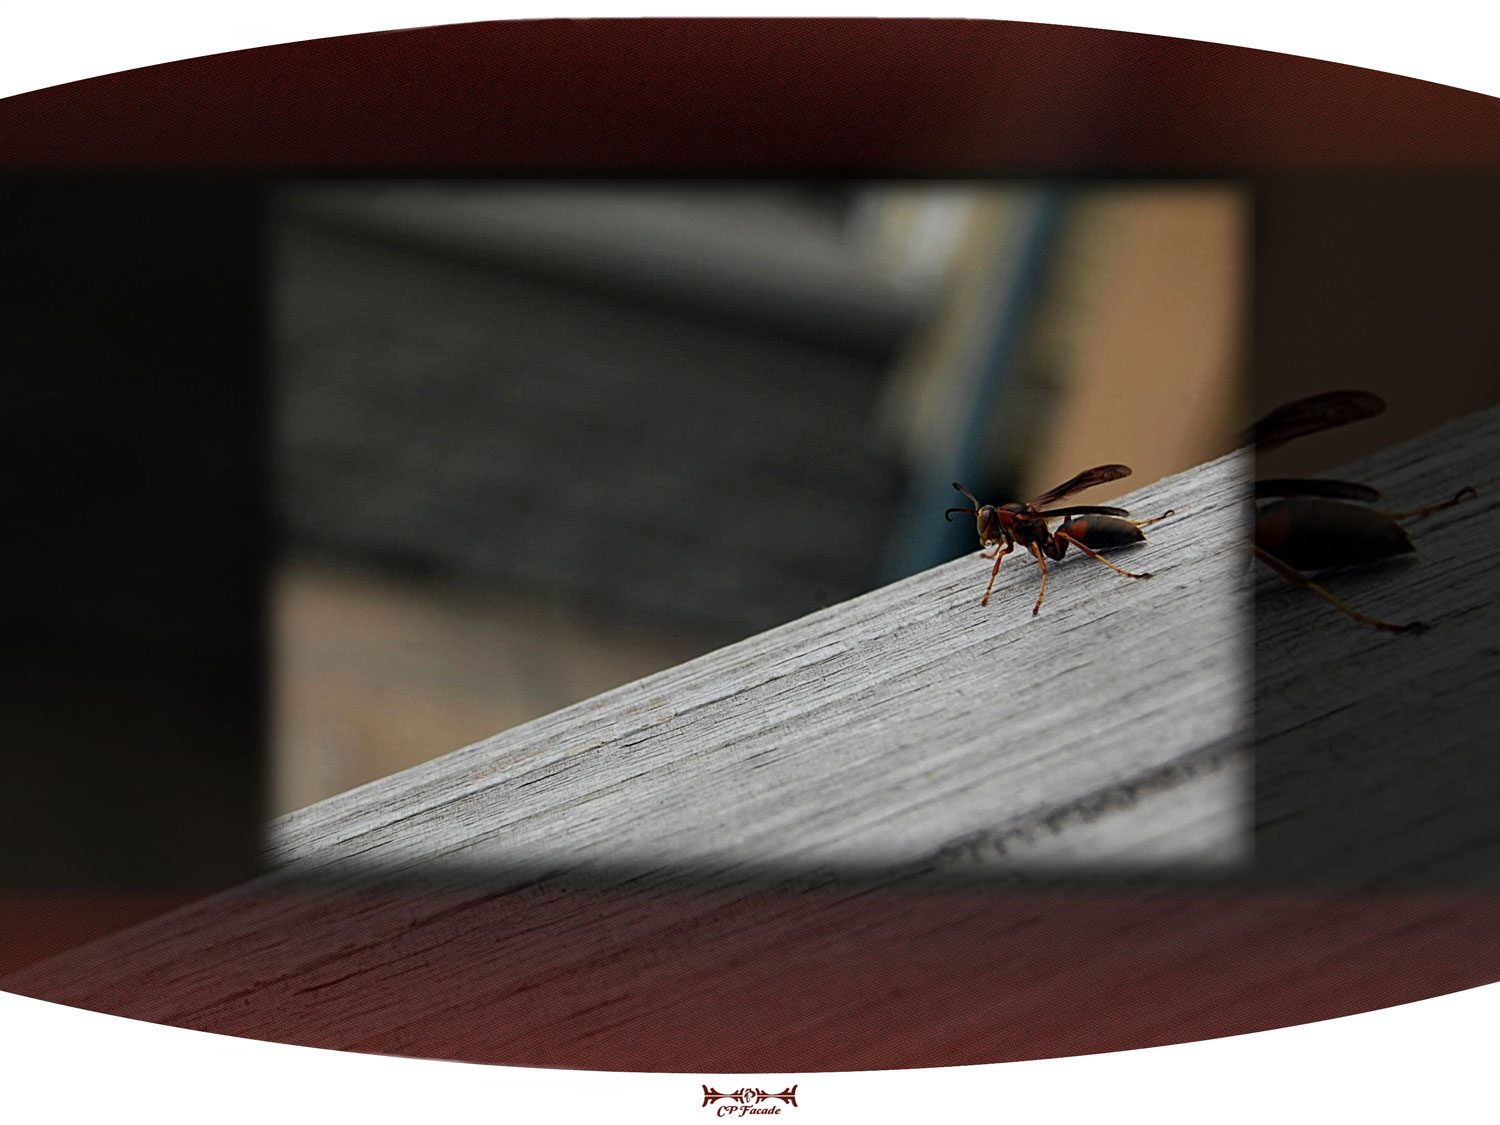 Macro shot of a wasp sitting on wooden stairs